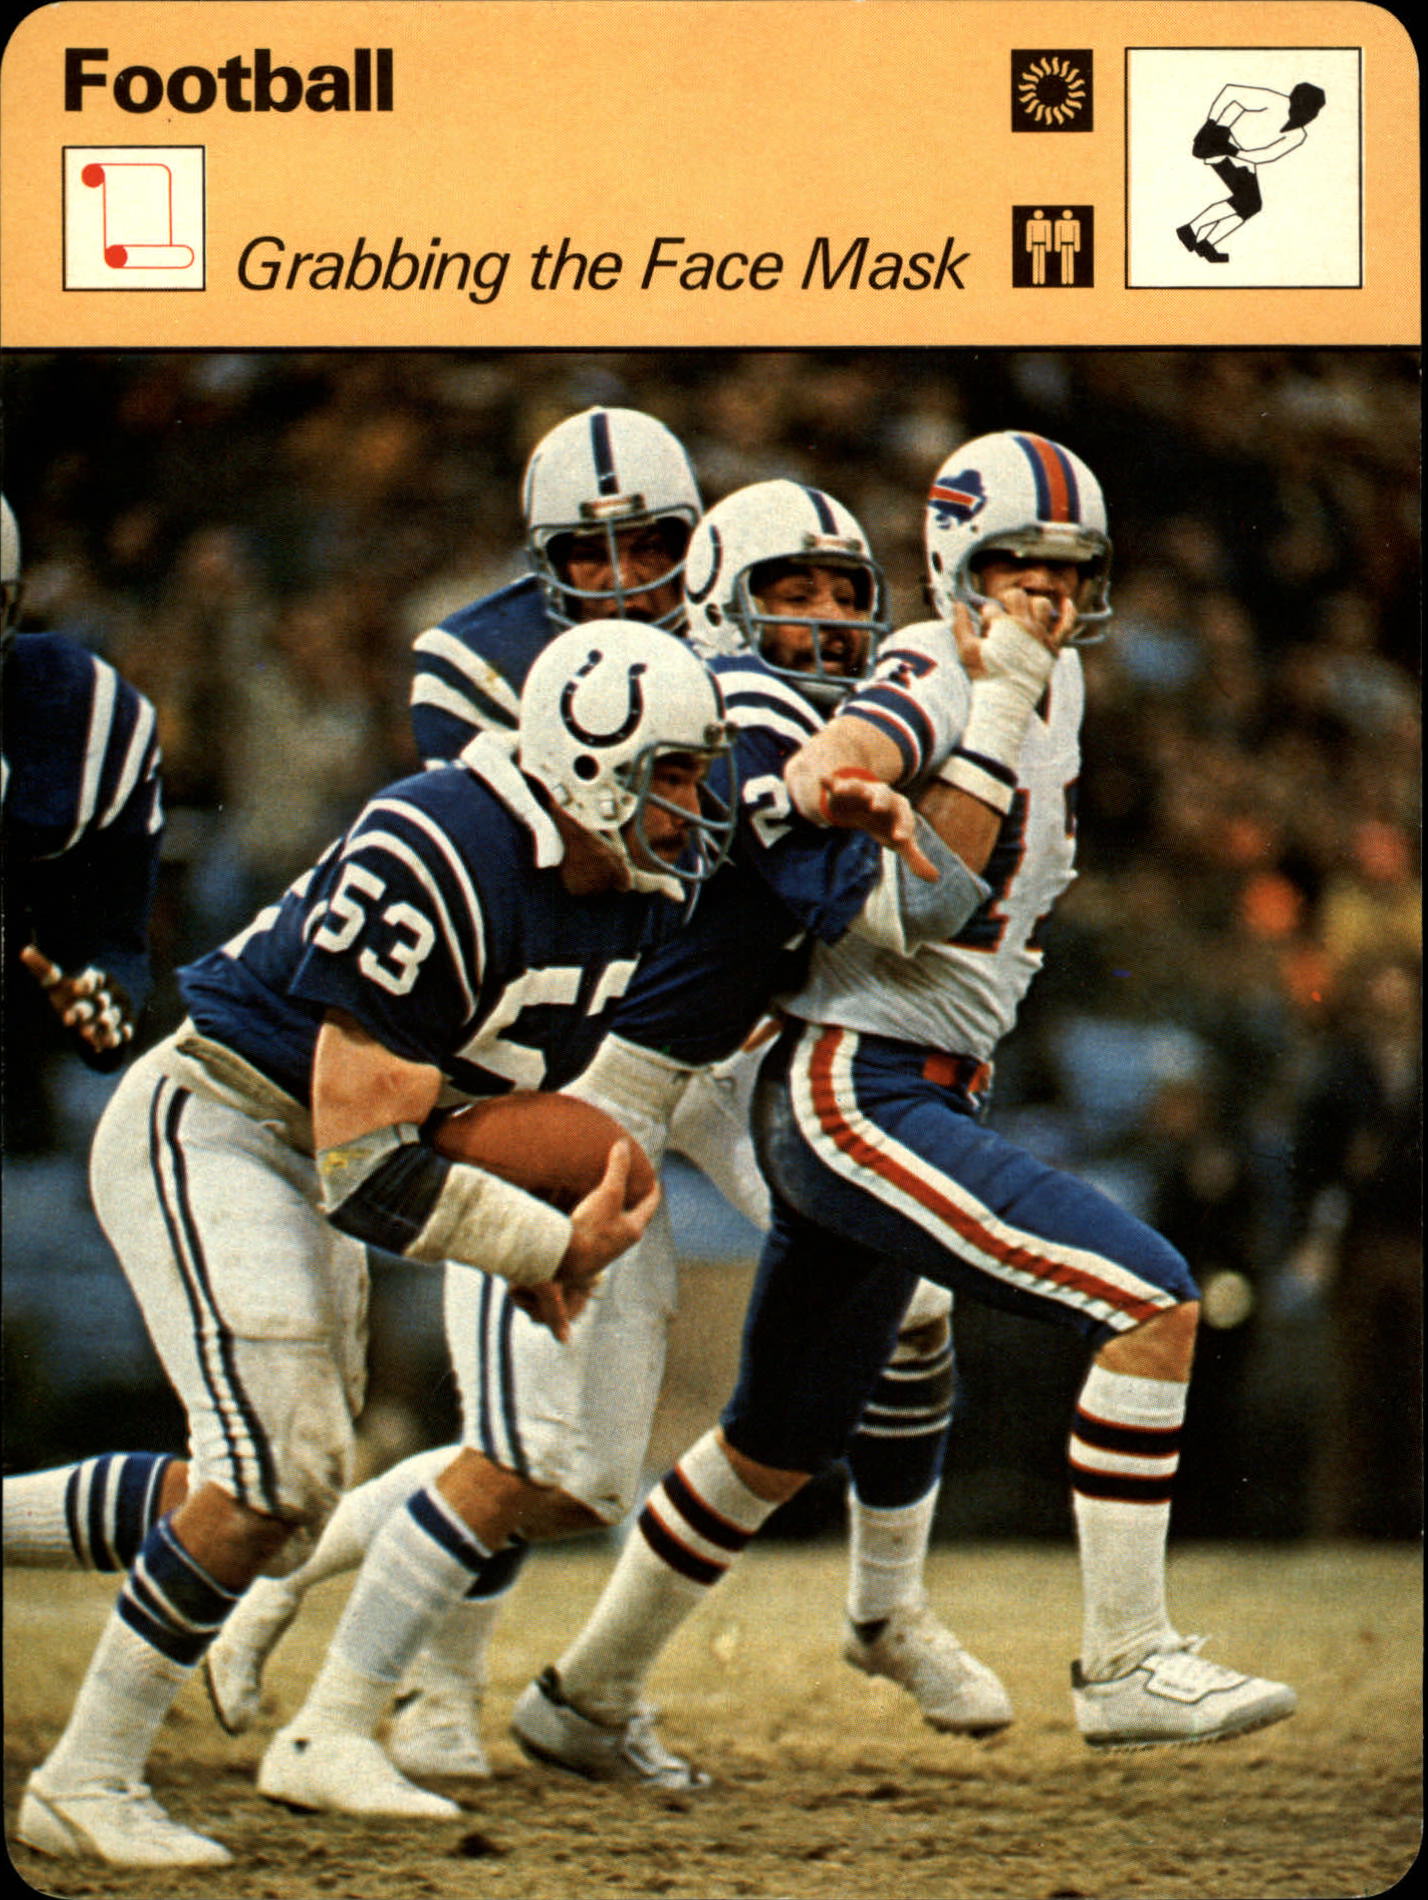 1977-79 Sportscaster Series 39 #3921 Grabbing the Face Mask